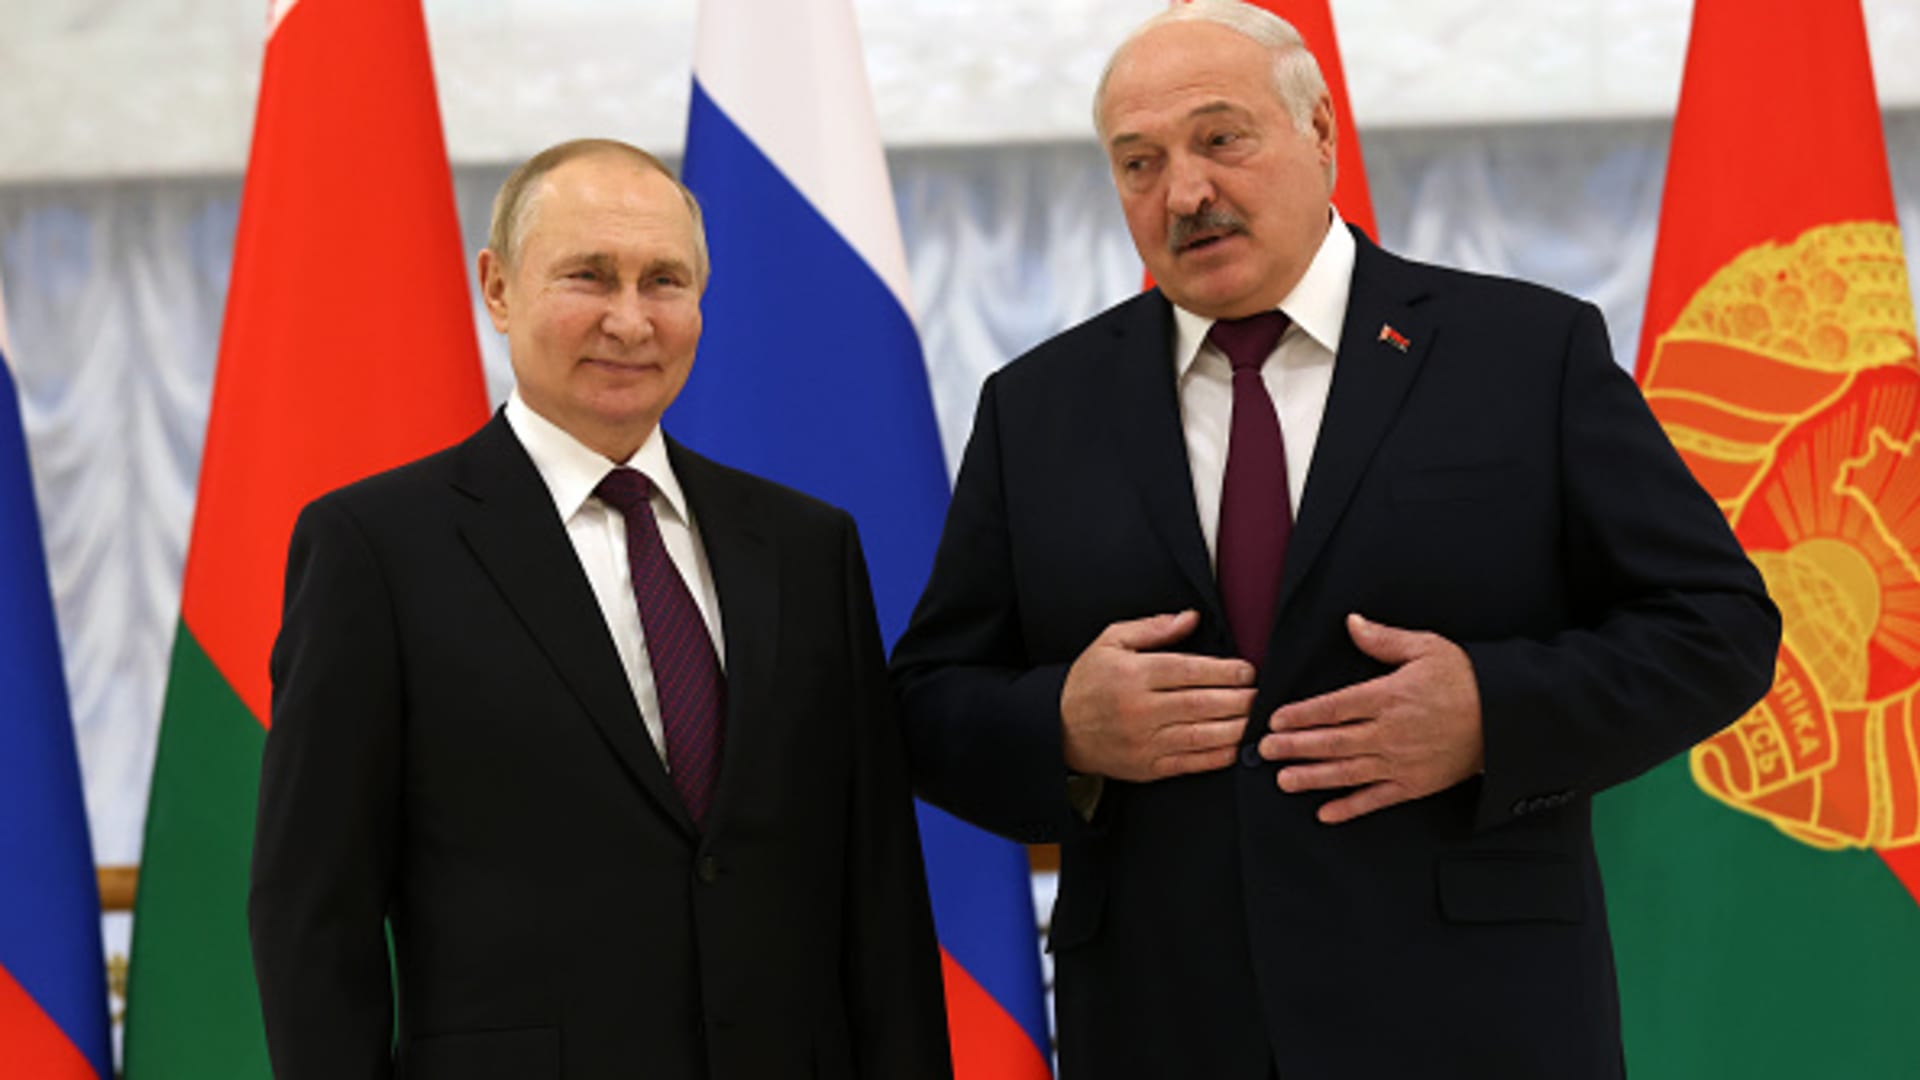 Russian President Vladimir Putin and Belarusian President Alexander Lukashenko at the Palace of Independence on Dec. 19, 2022, in Minsk, Belarus.